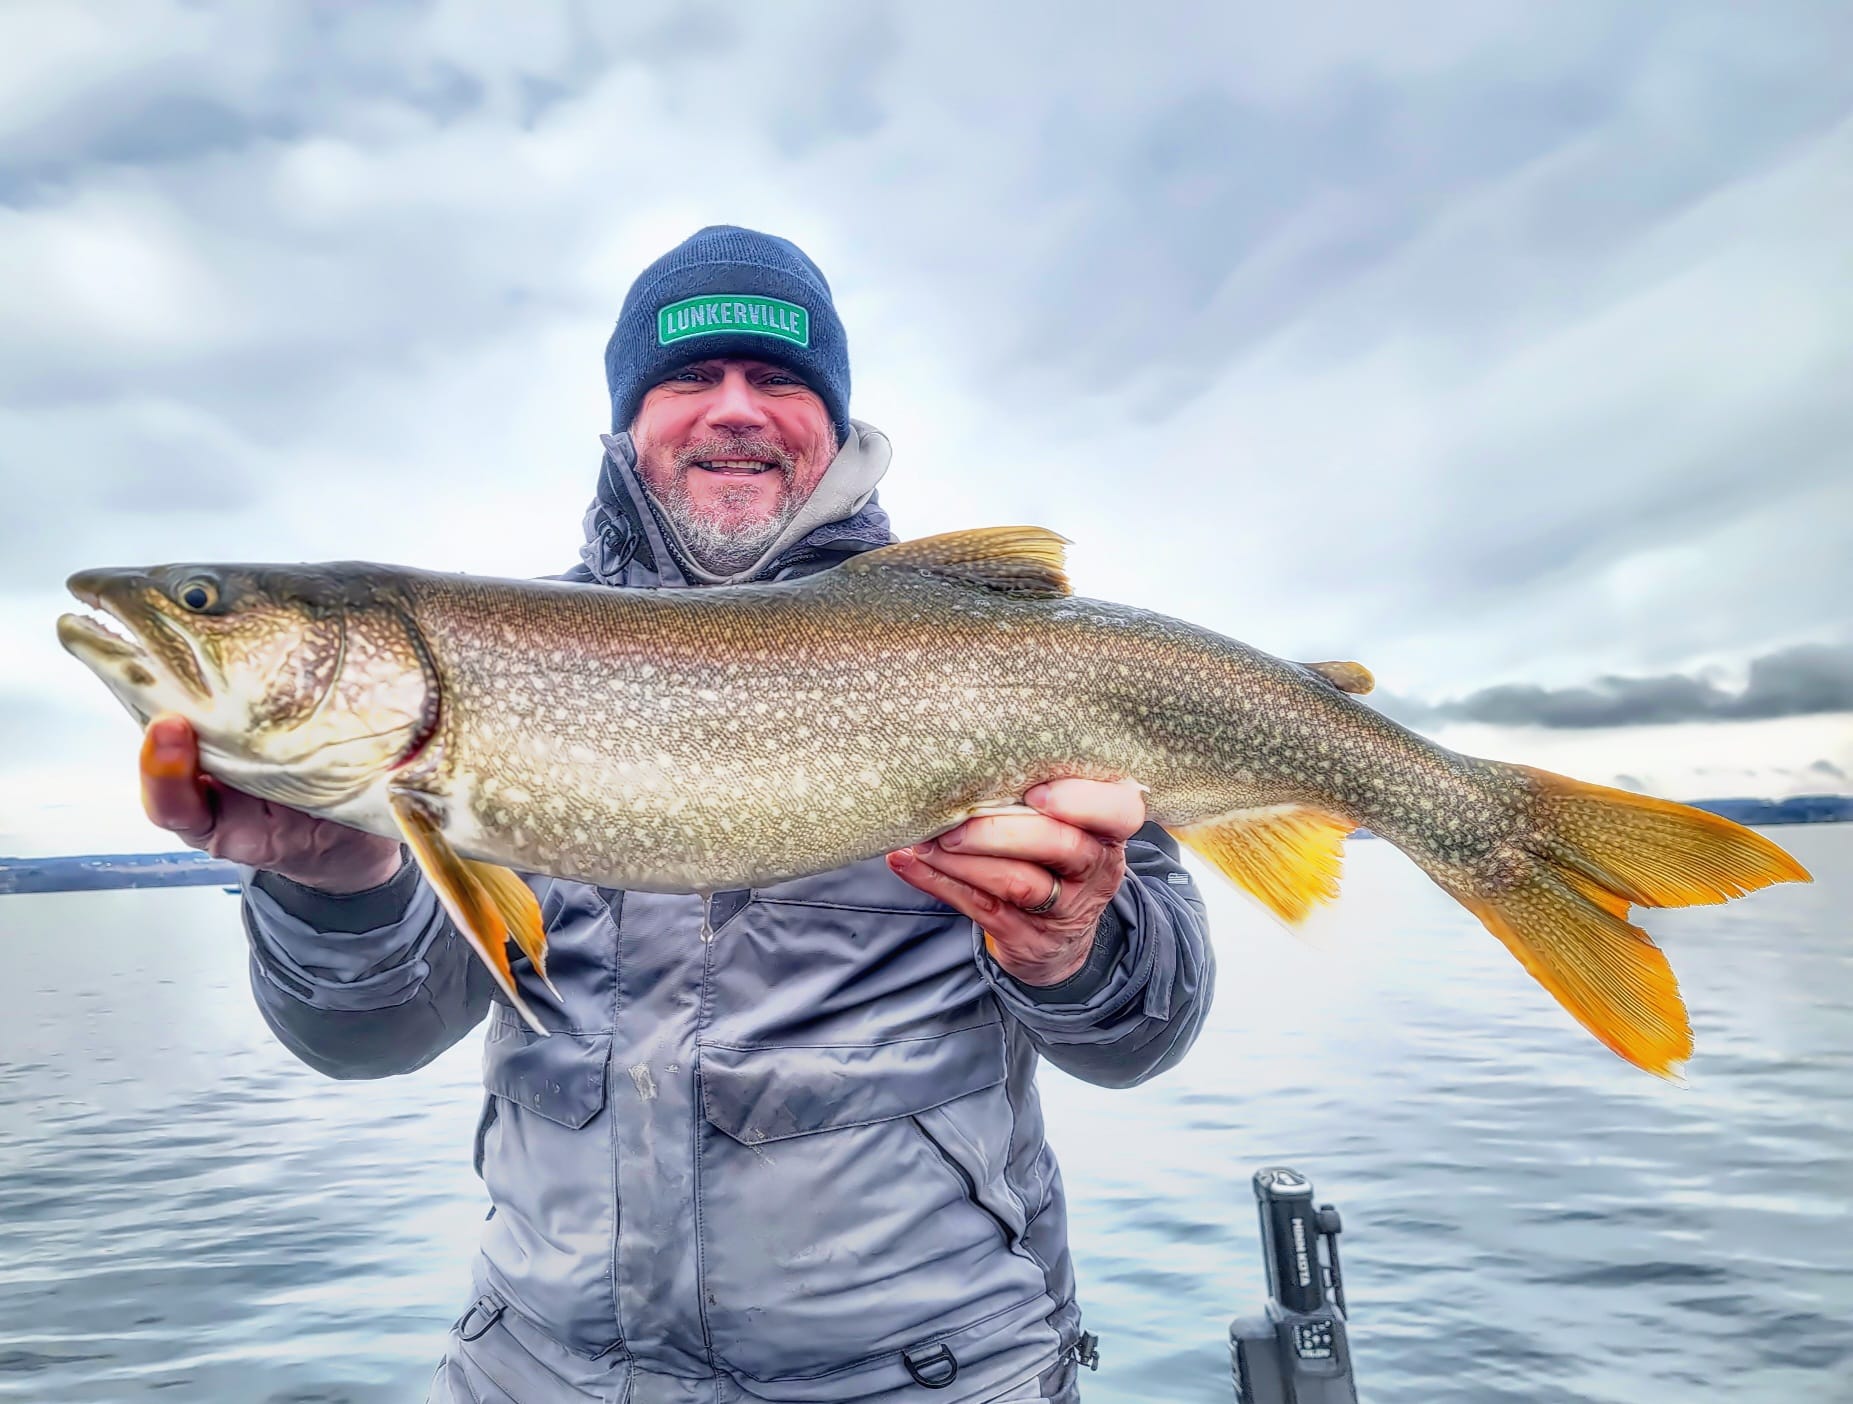 Fly fishing for lake trout